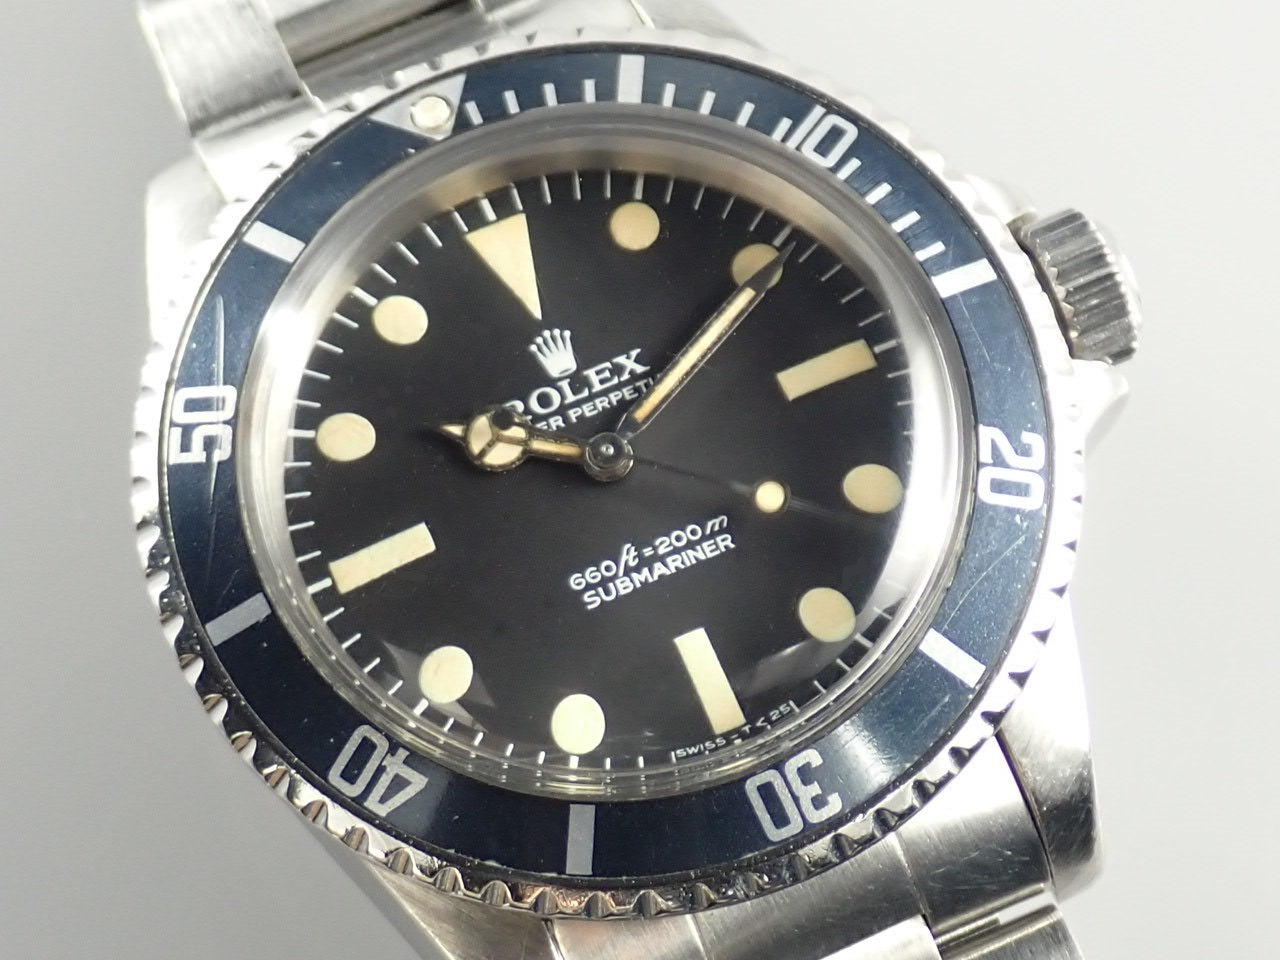 Rolex Submariner &lt;Box and other items&gt;